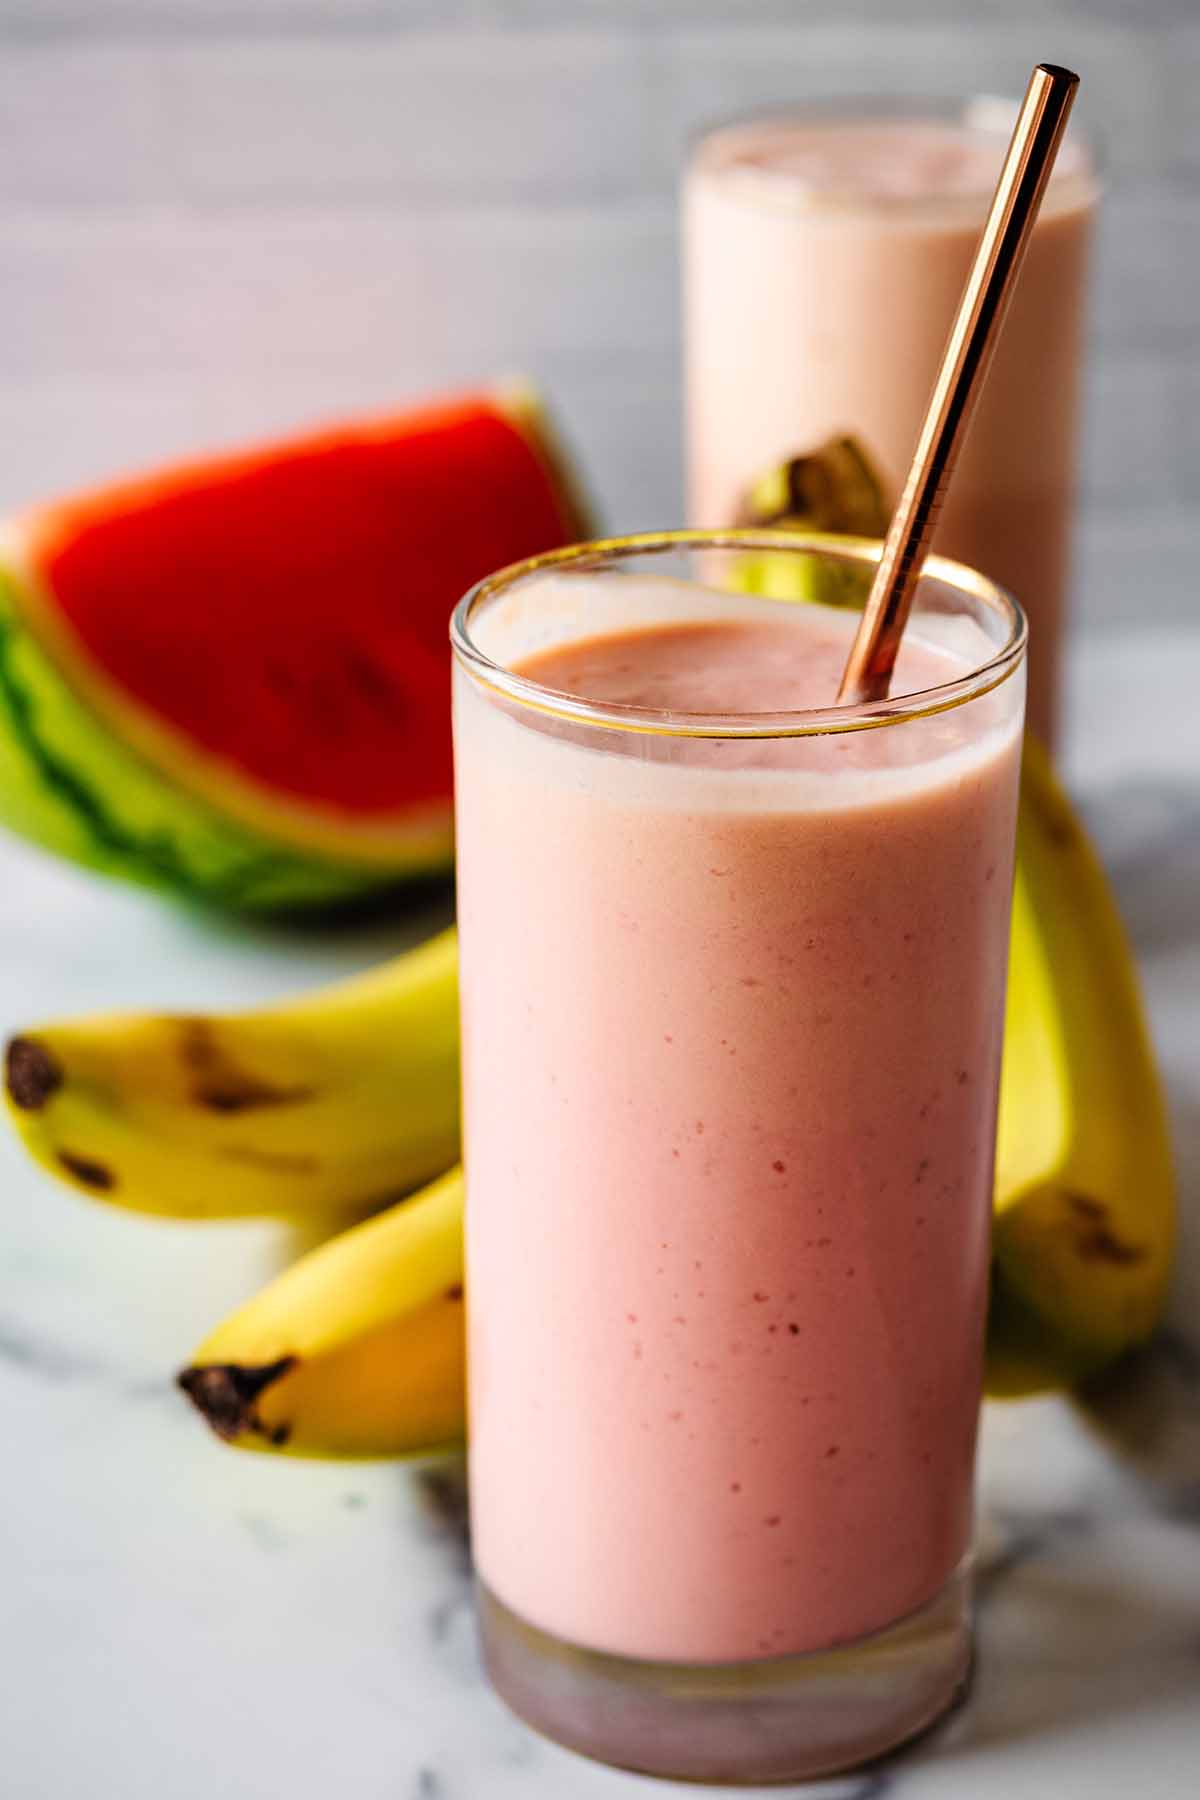 Watermelon banana smoothie in a tall glass with a bronze straw and a second smoothie, watermelon slice and bananas in the background